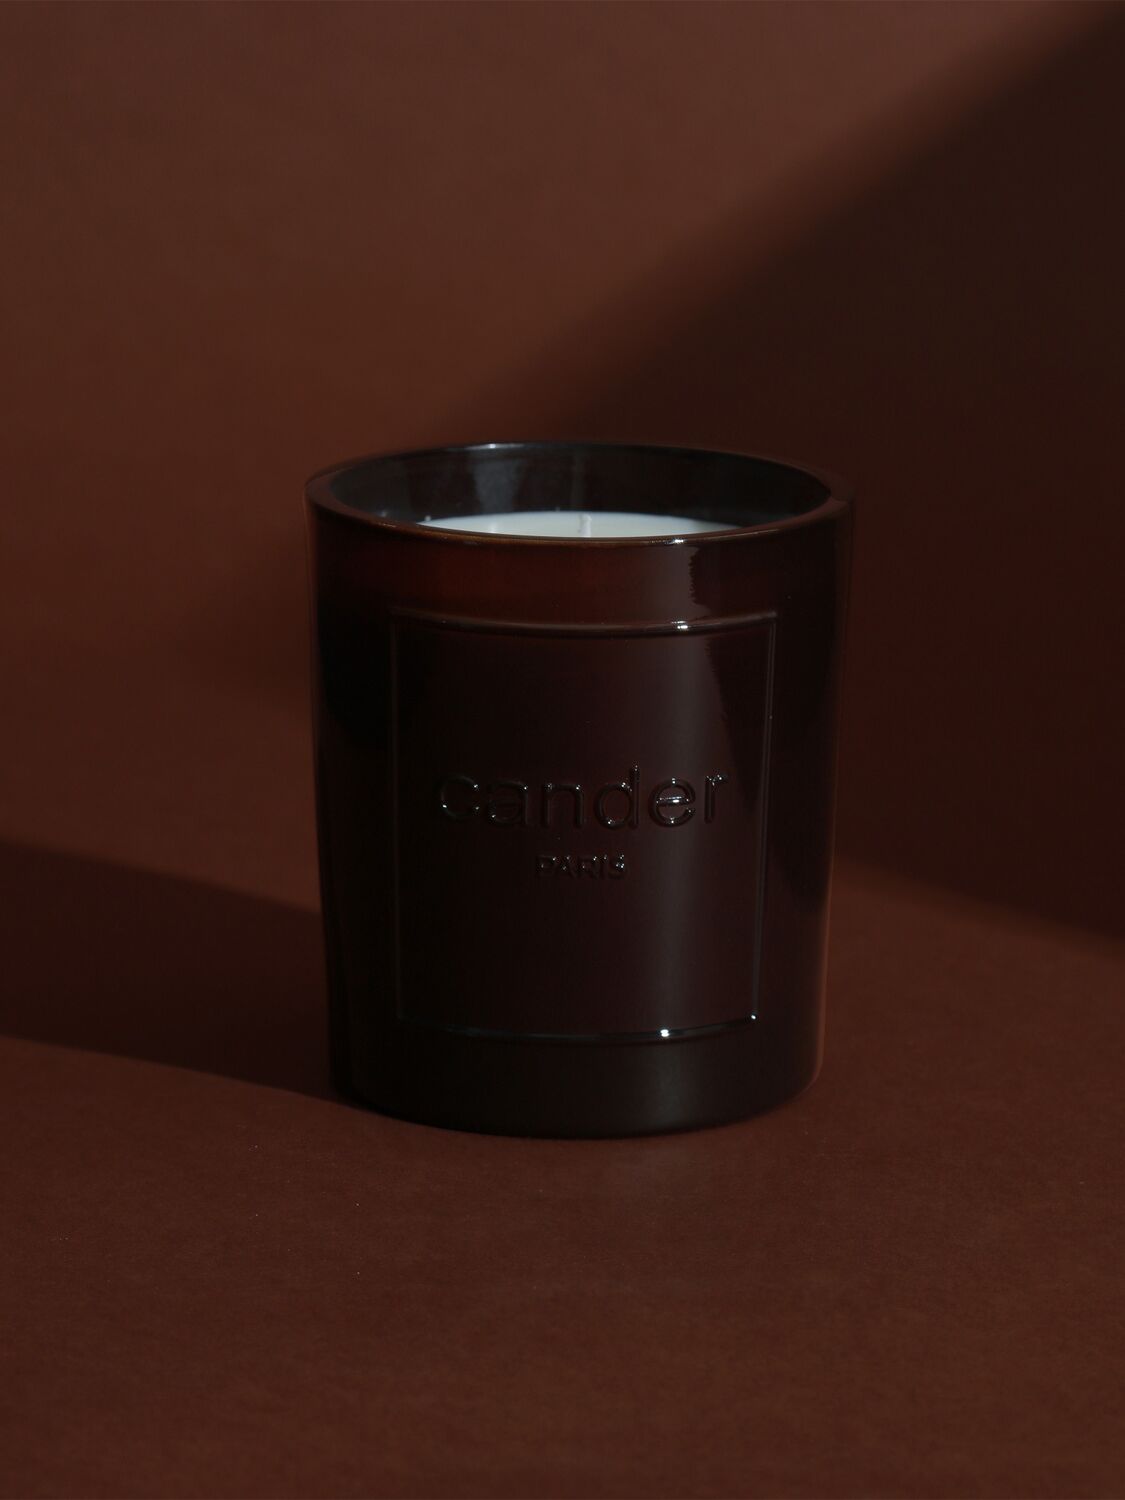 Shop Cander Paris Oud Particulier Candle In Brown